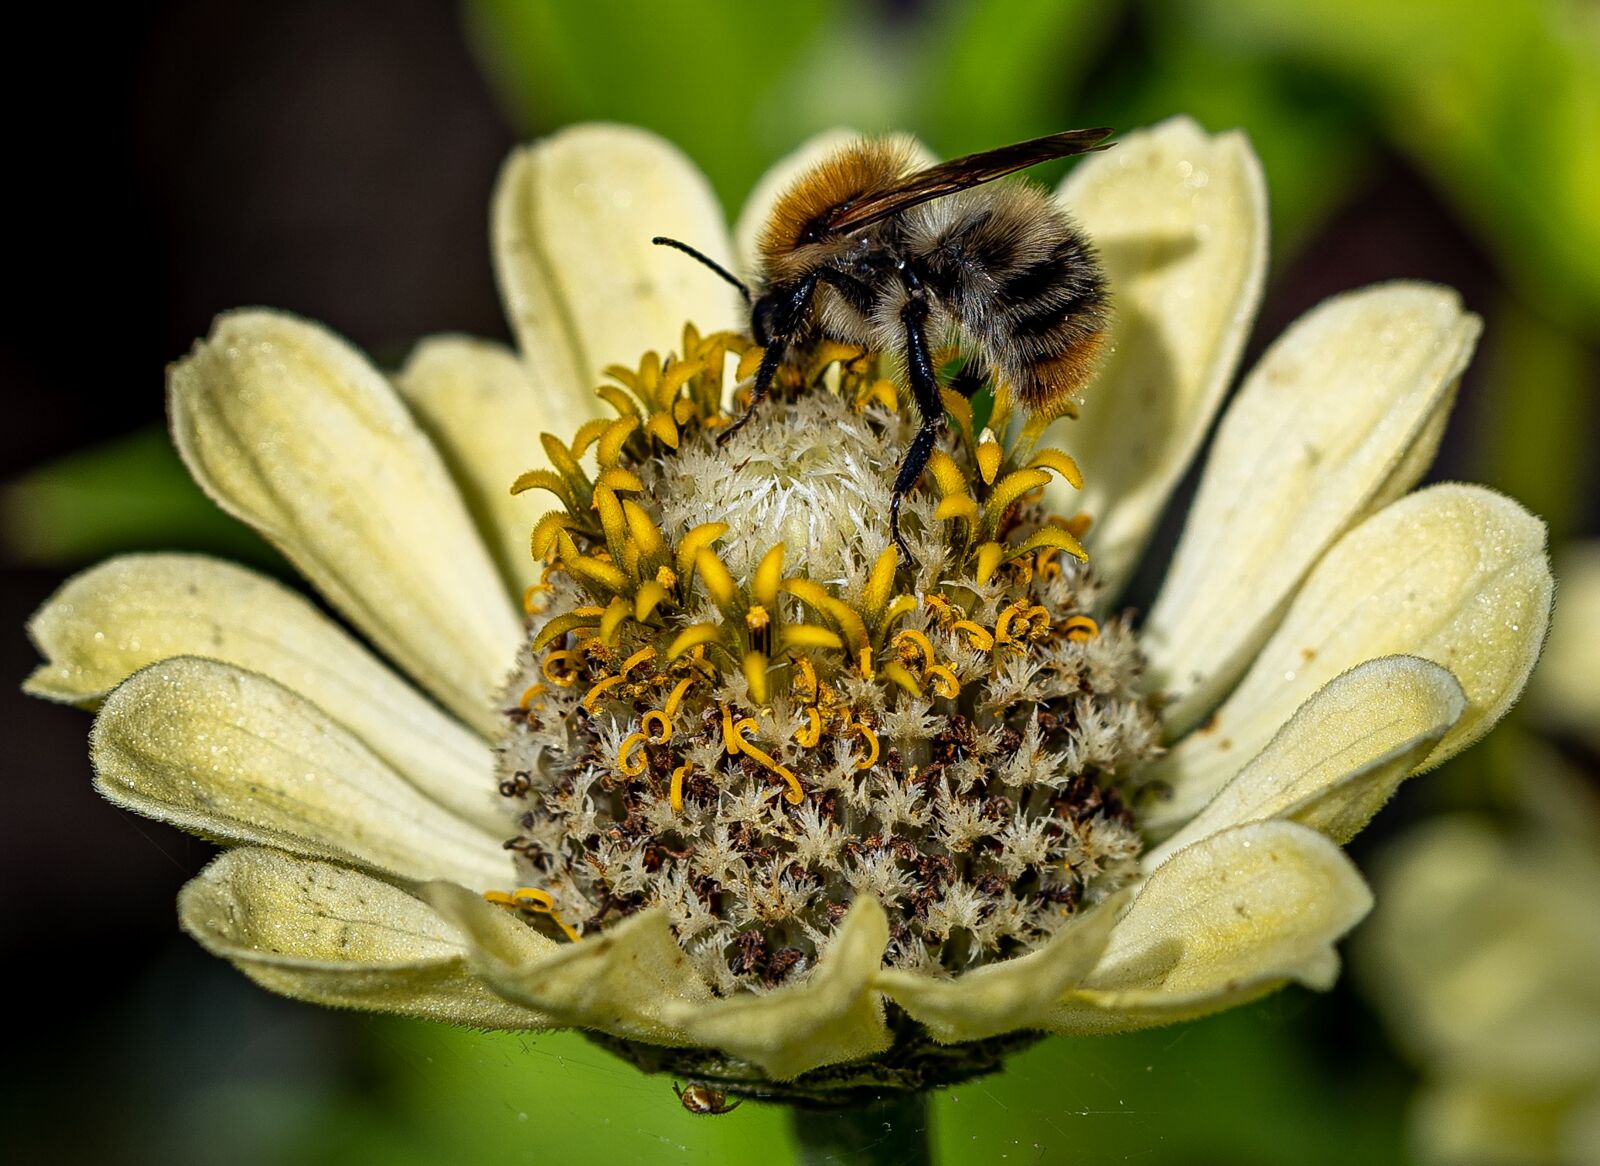 Sony a7 III sample photo. Flower, bee, insect photography